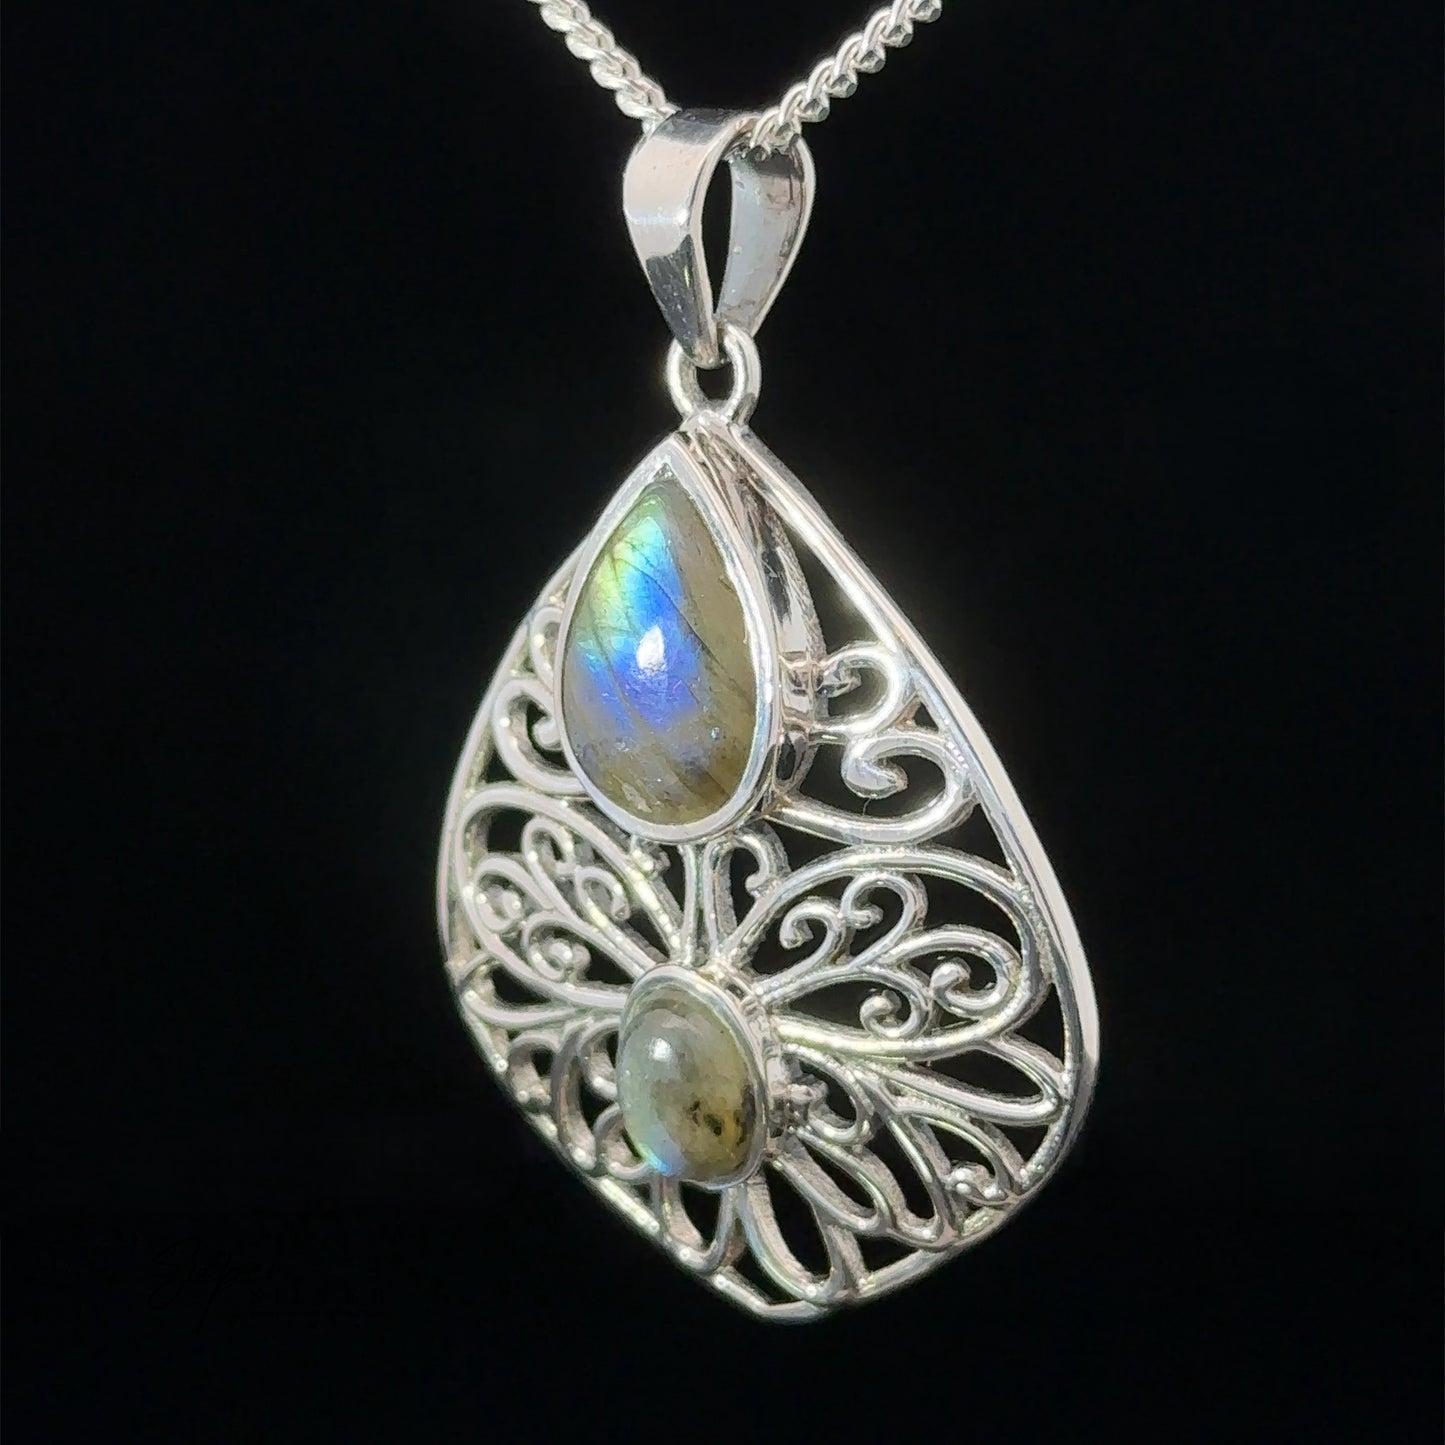 
                  
                    A Teardrop Filigree Gemstone Pendants with an intricate design featuring two labradorite stones, one teardrop-shaped and one oval-shaped, hangs from a silver chain against a black background. An amethyst accent adds a touch of mystique.
                  
                